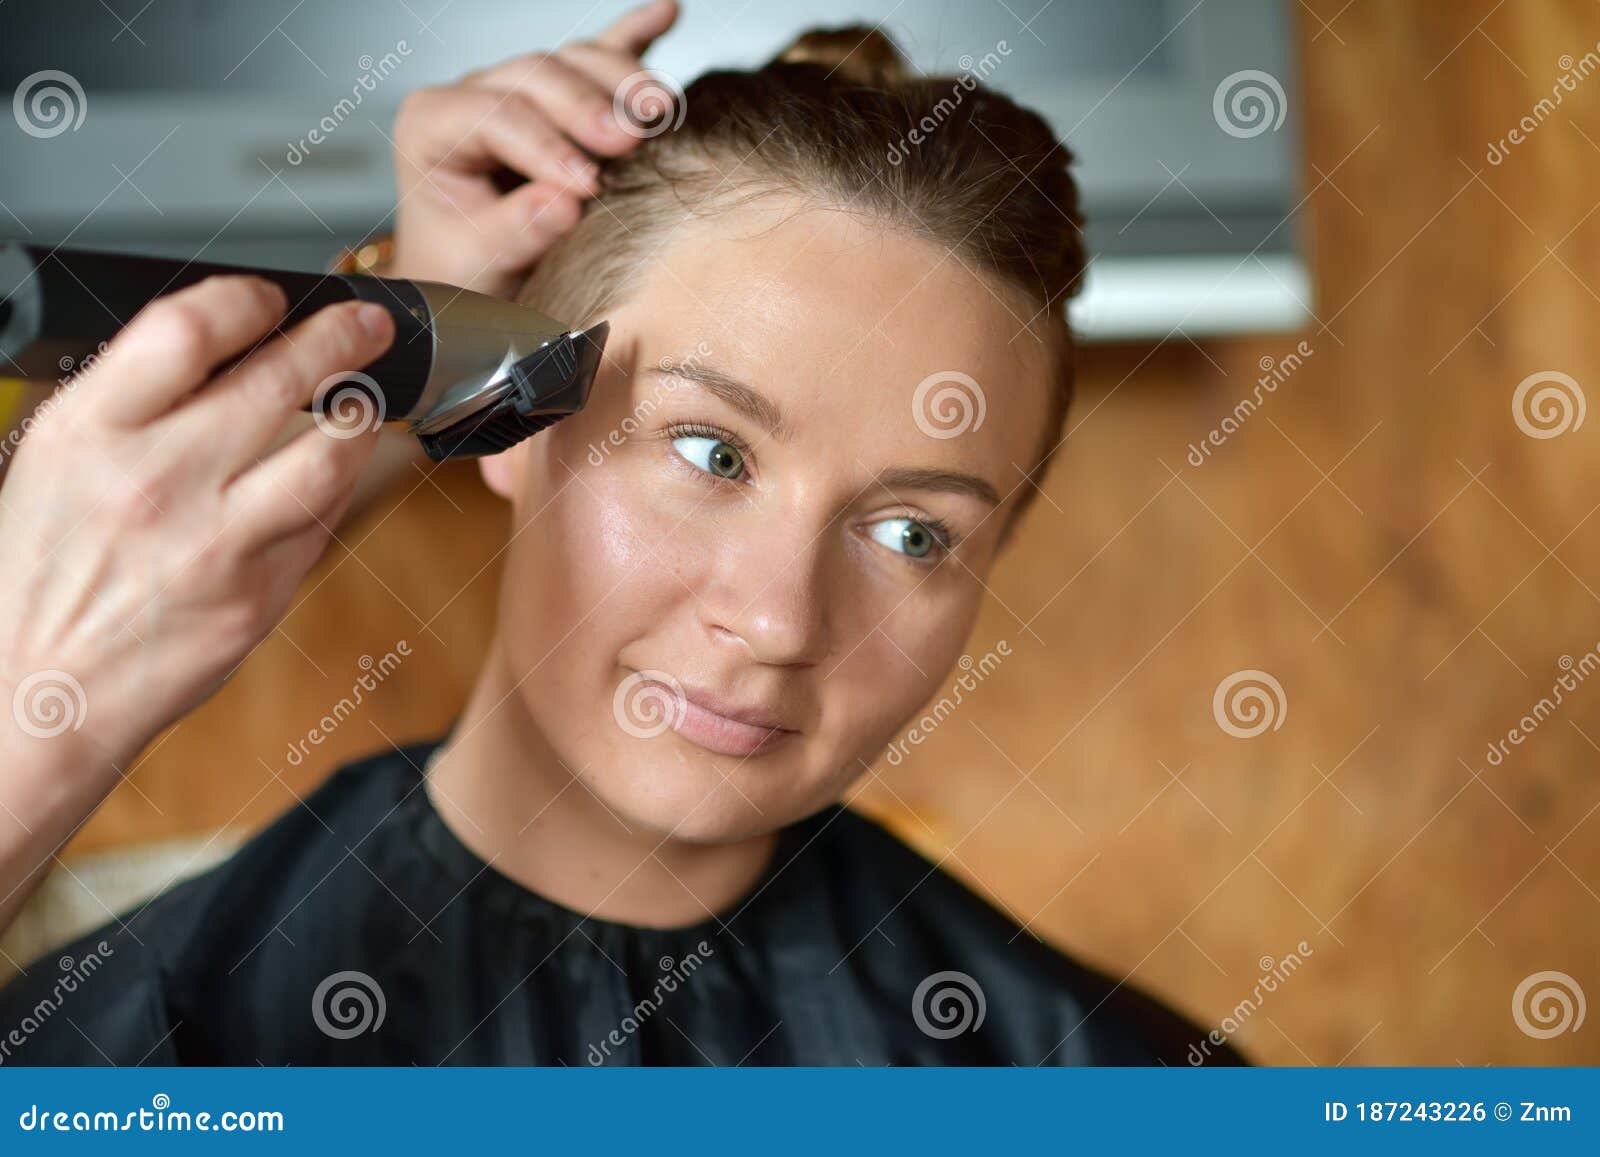 Women`s haircut at home stock photo. Image of lockdown - 187243226